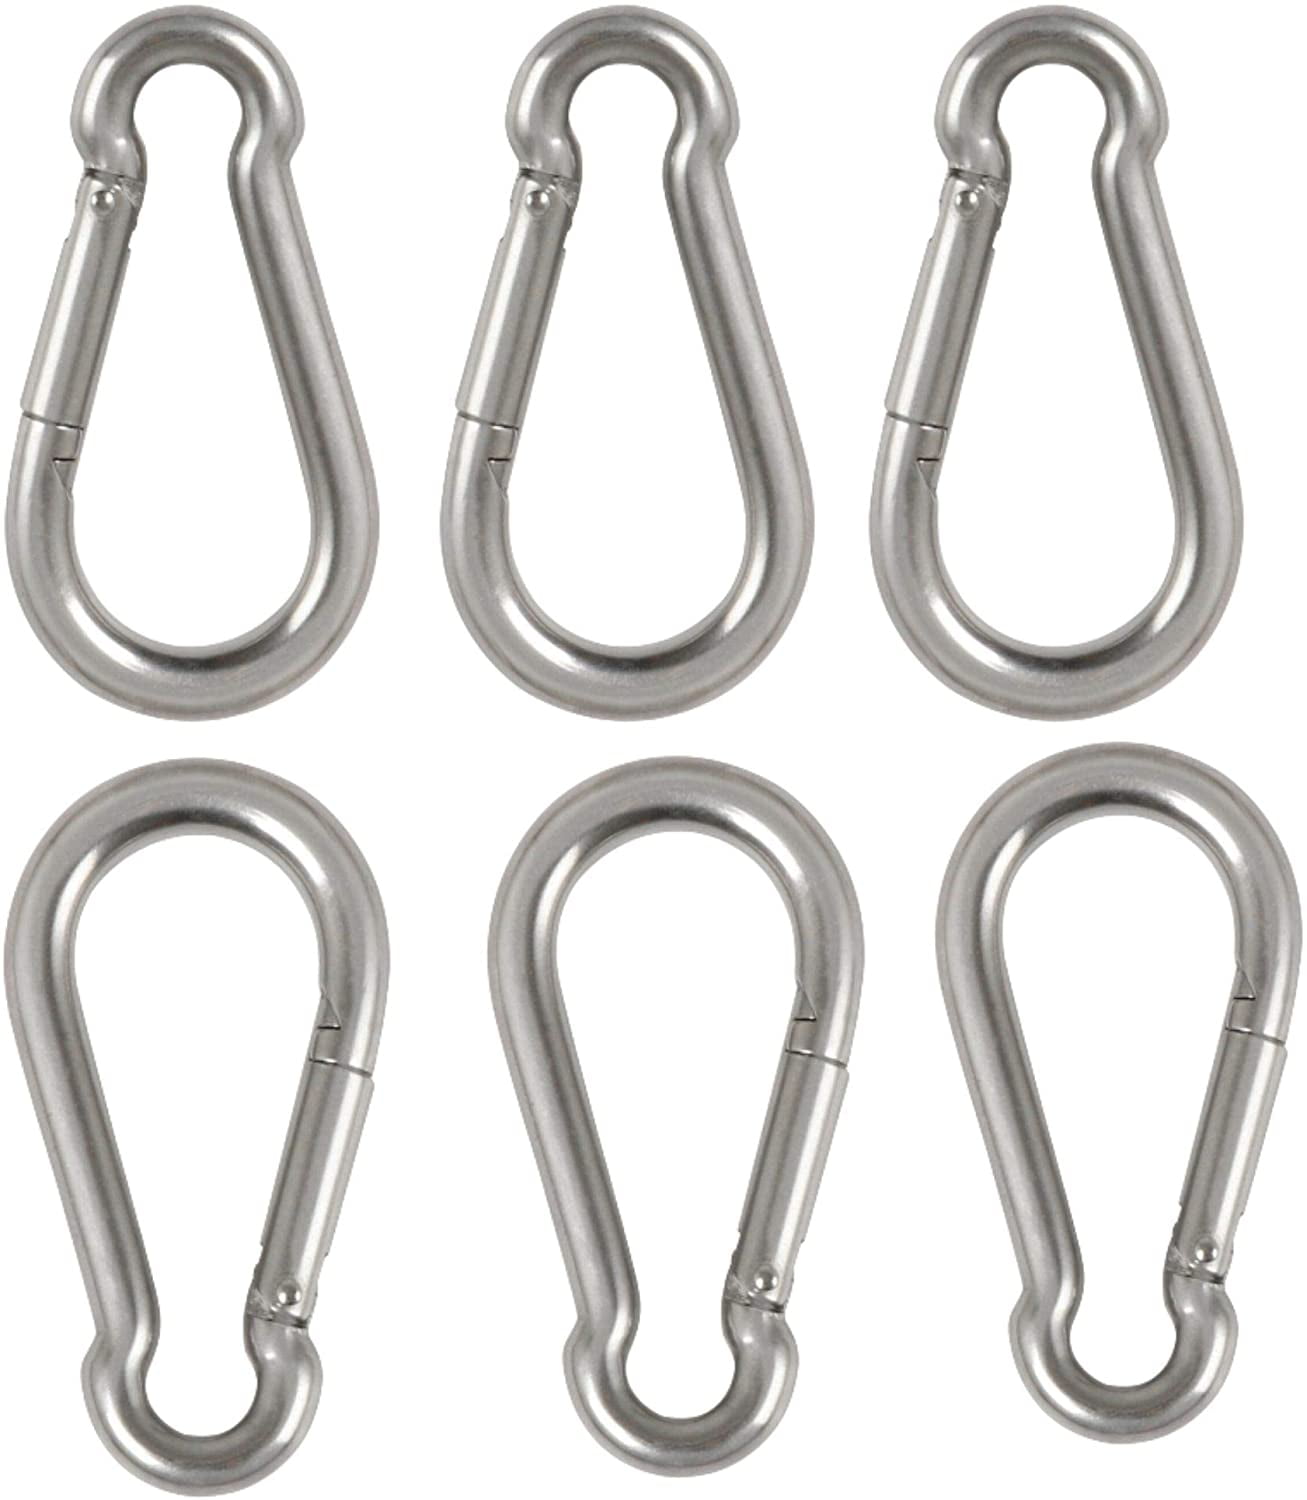 Spring Snap Hooks Carabiner Clip with Screw Lock，3 inch Carabiners Clips Hook... 